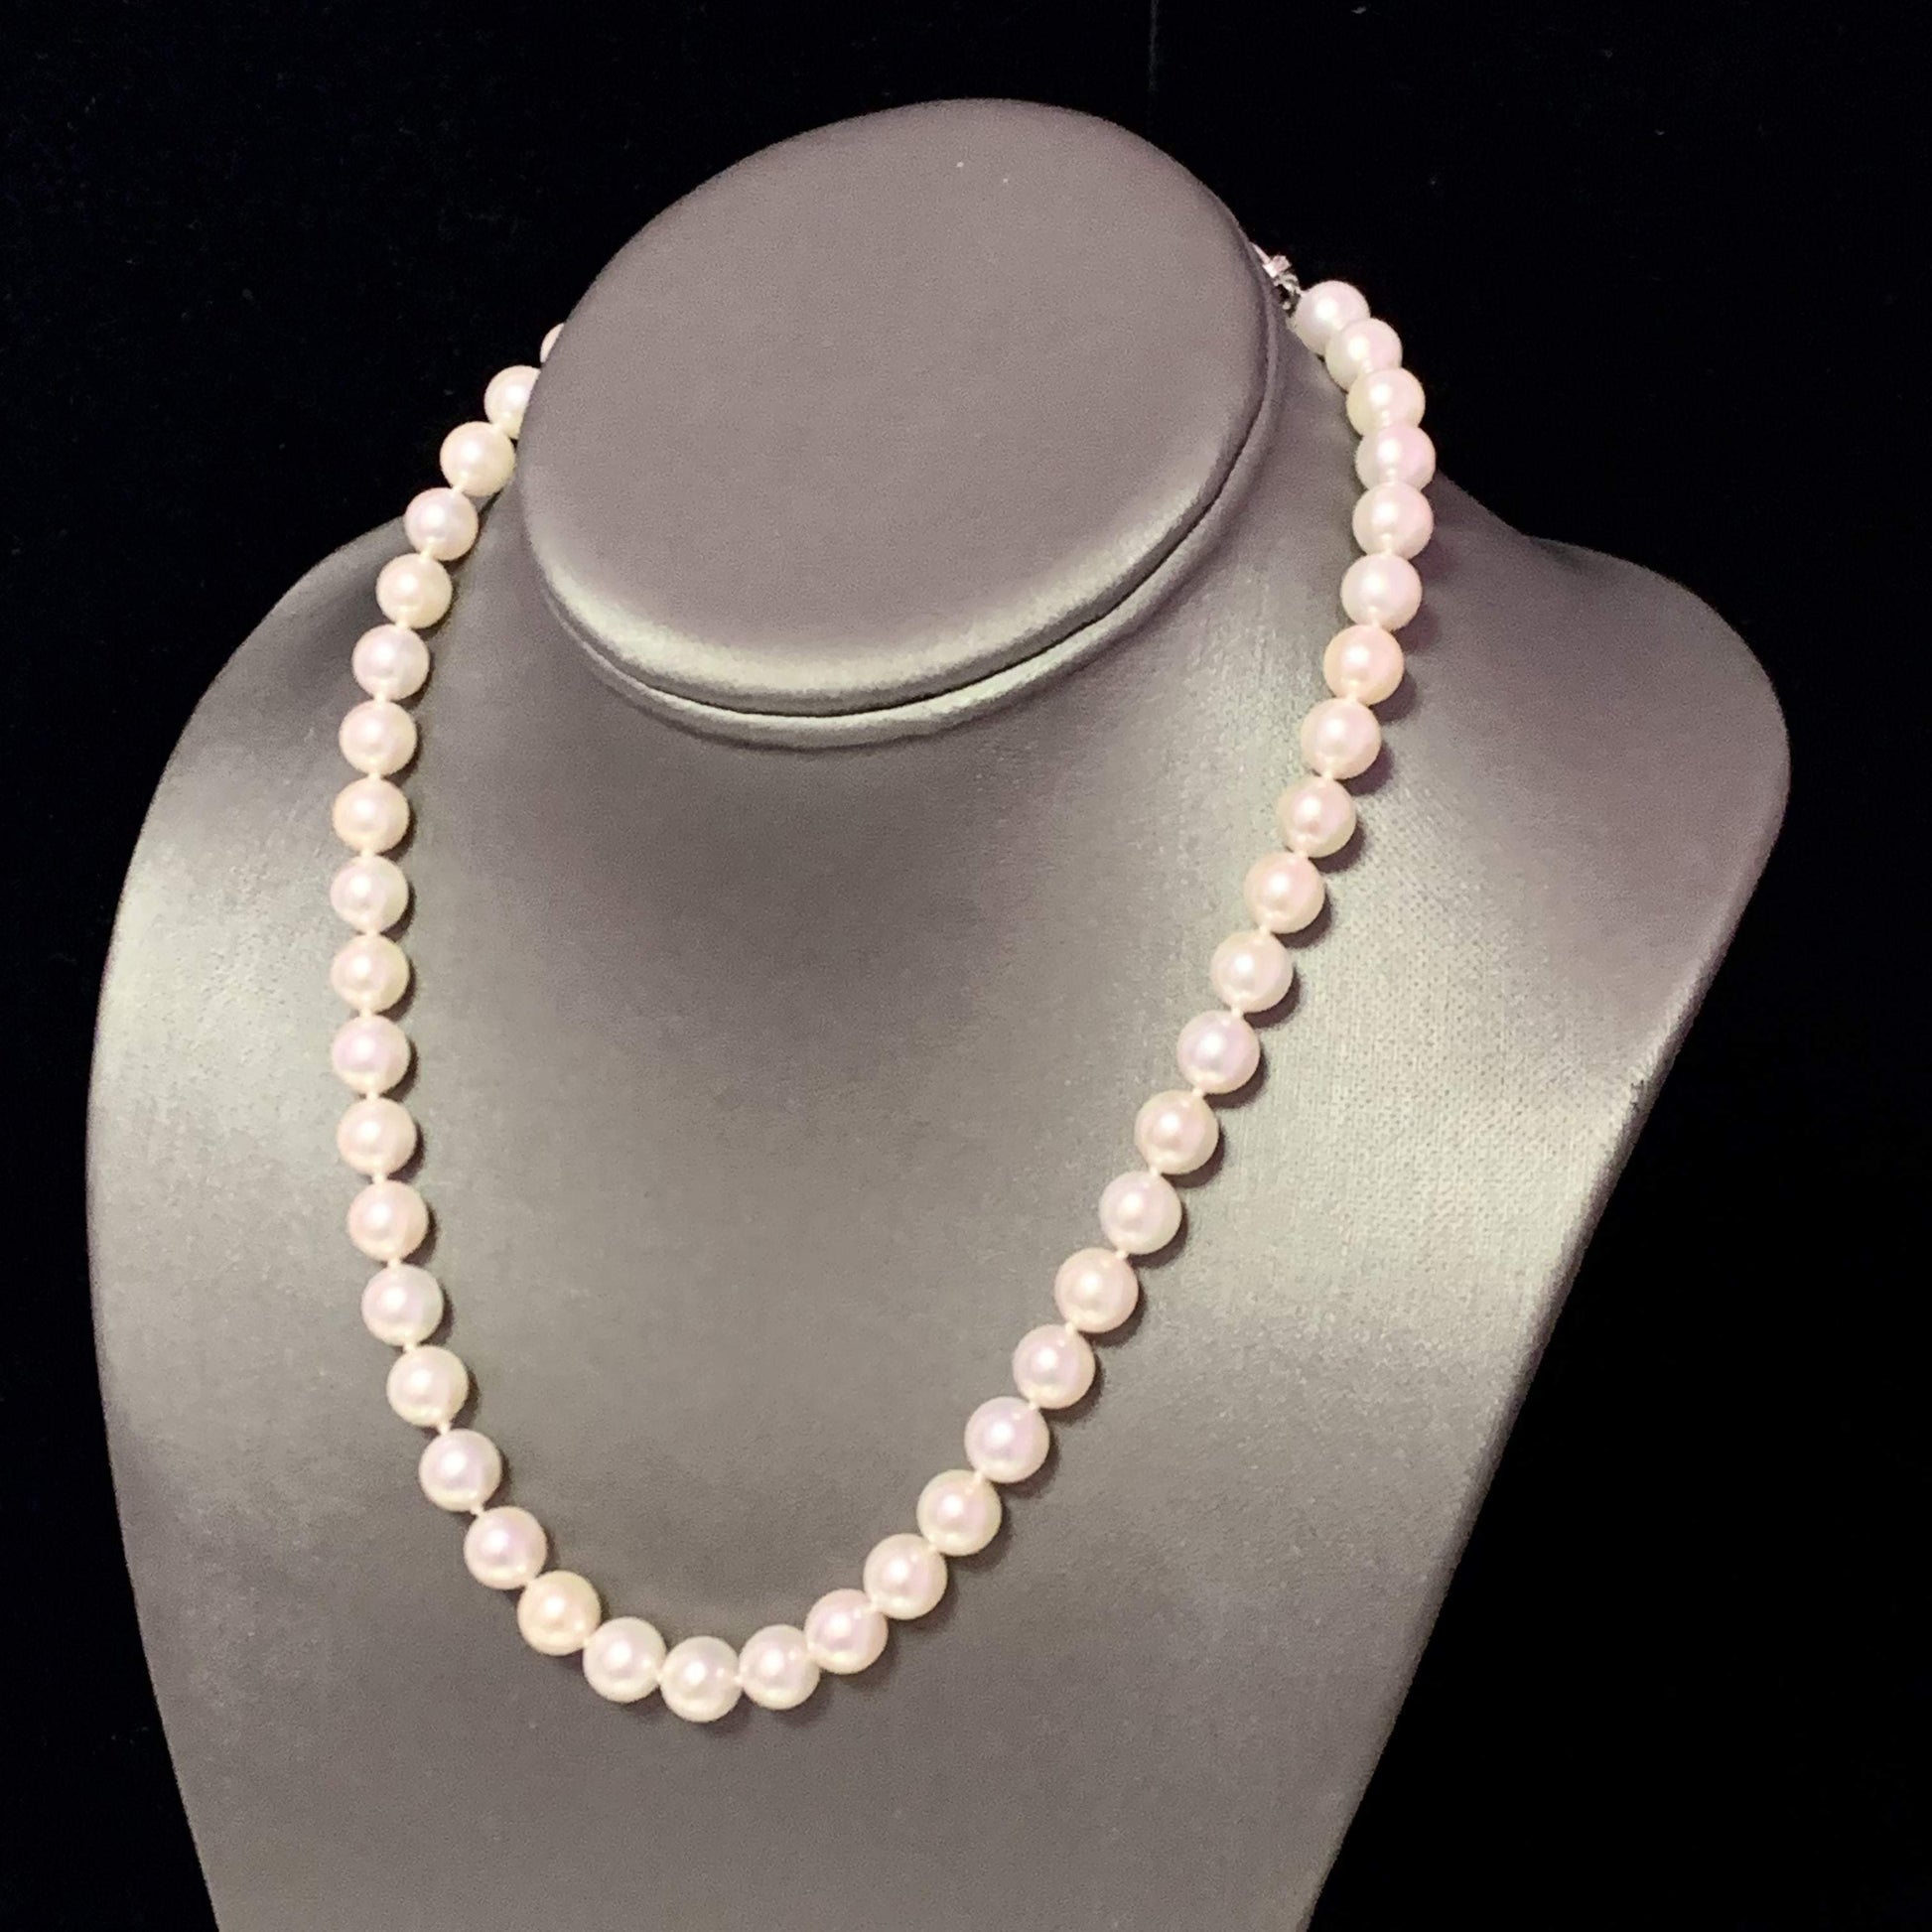 Akoya Pearl Necklace 14k White Gold 17" 8.5 mm Certified $4,990 114458 - Certified Estate Jewelry